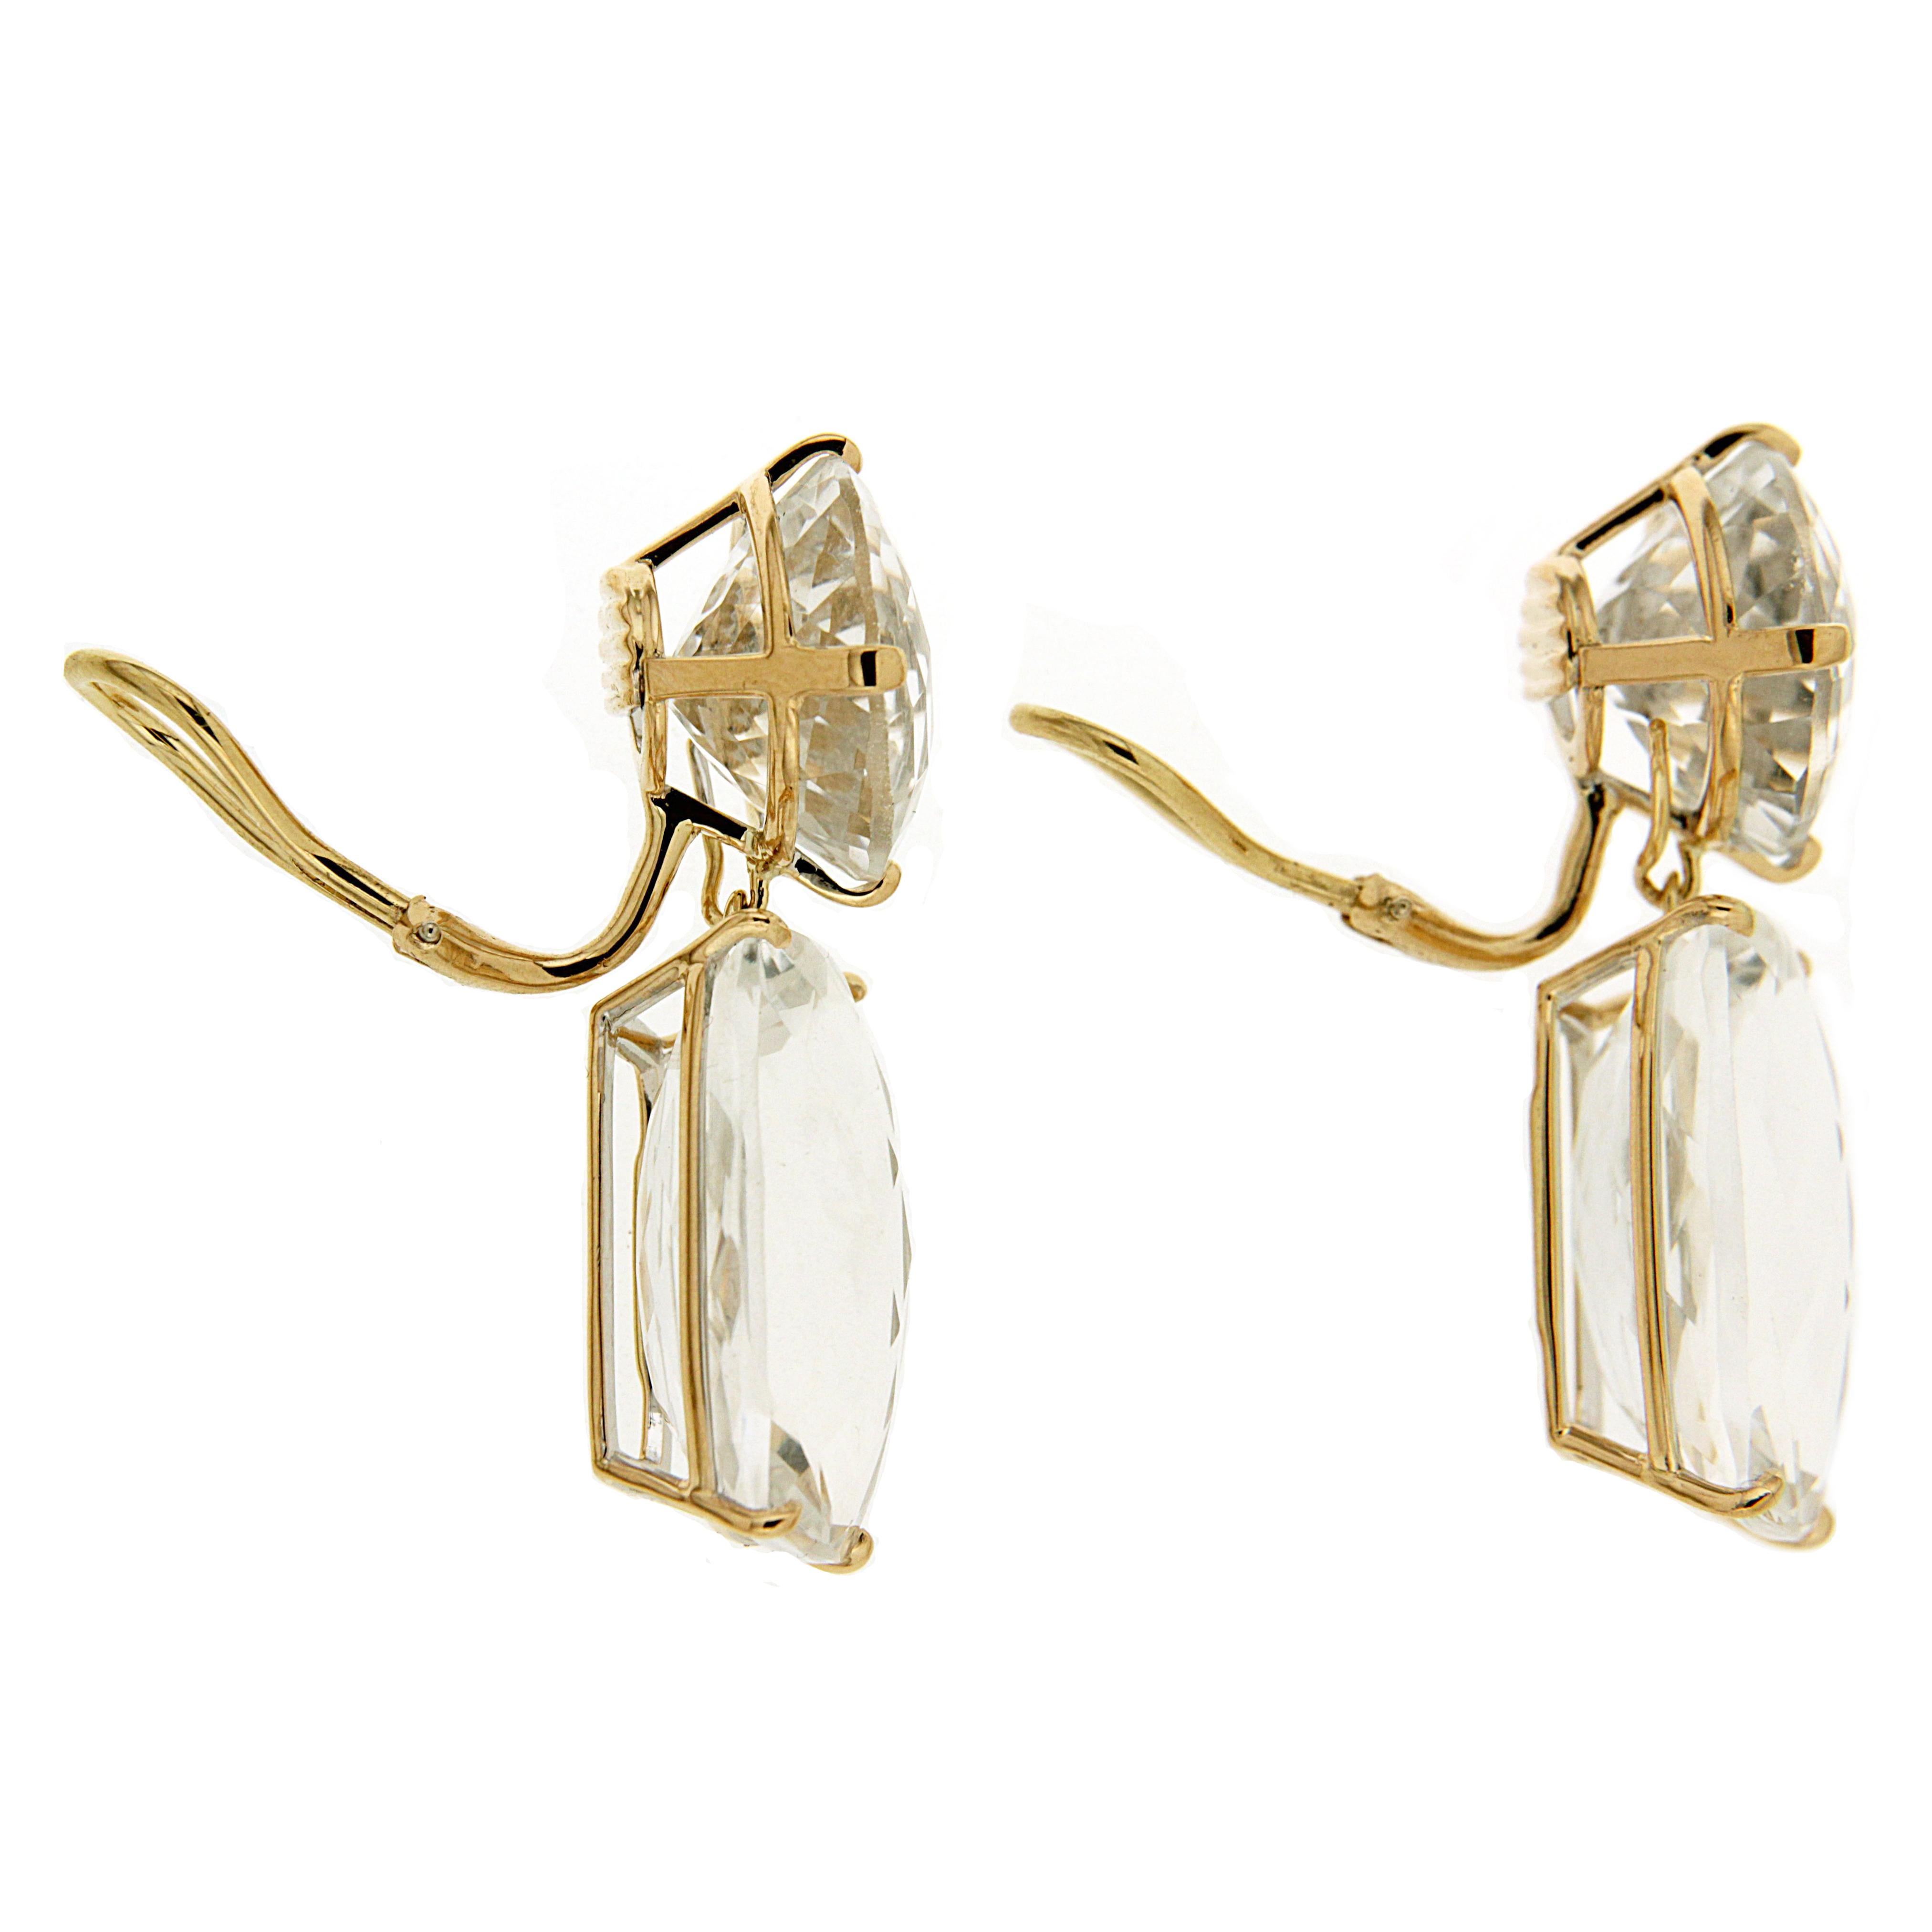 White topaz shine in these drop earrings. Round cut topaz decorate the tops, while elongated cushion cuts hang below. Minimal 18k yellow gold prongs secure the jewels while remaining a background detail. These earrings are finished with clip-backs. 